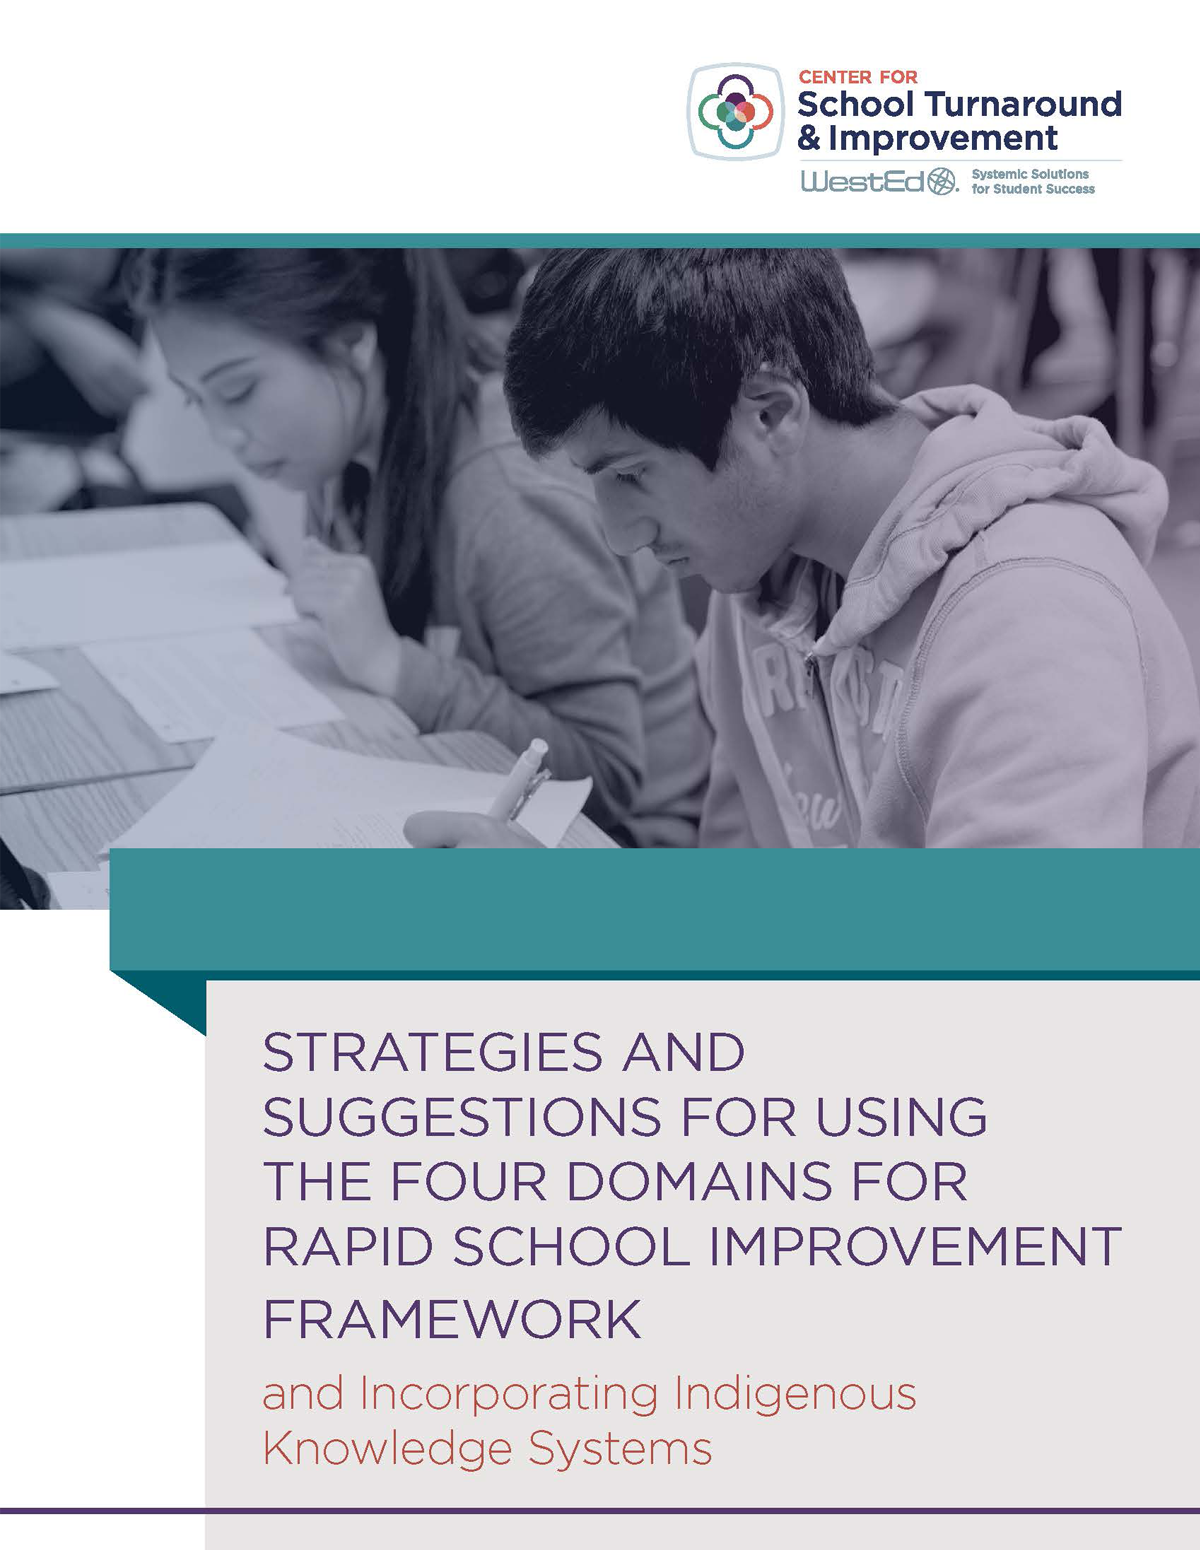 Strategies and Suggestions for Using the Four Domains for Rapid School Improvement Framework and Incorporating Indigenous Knowledge Systems